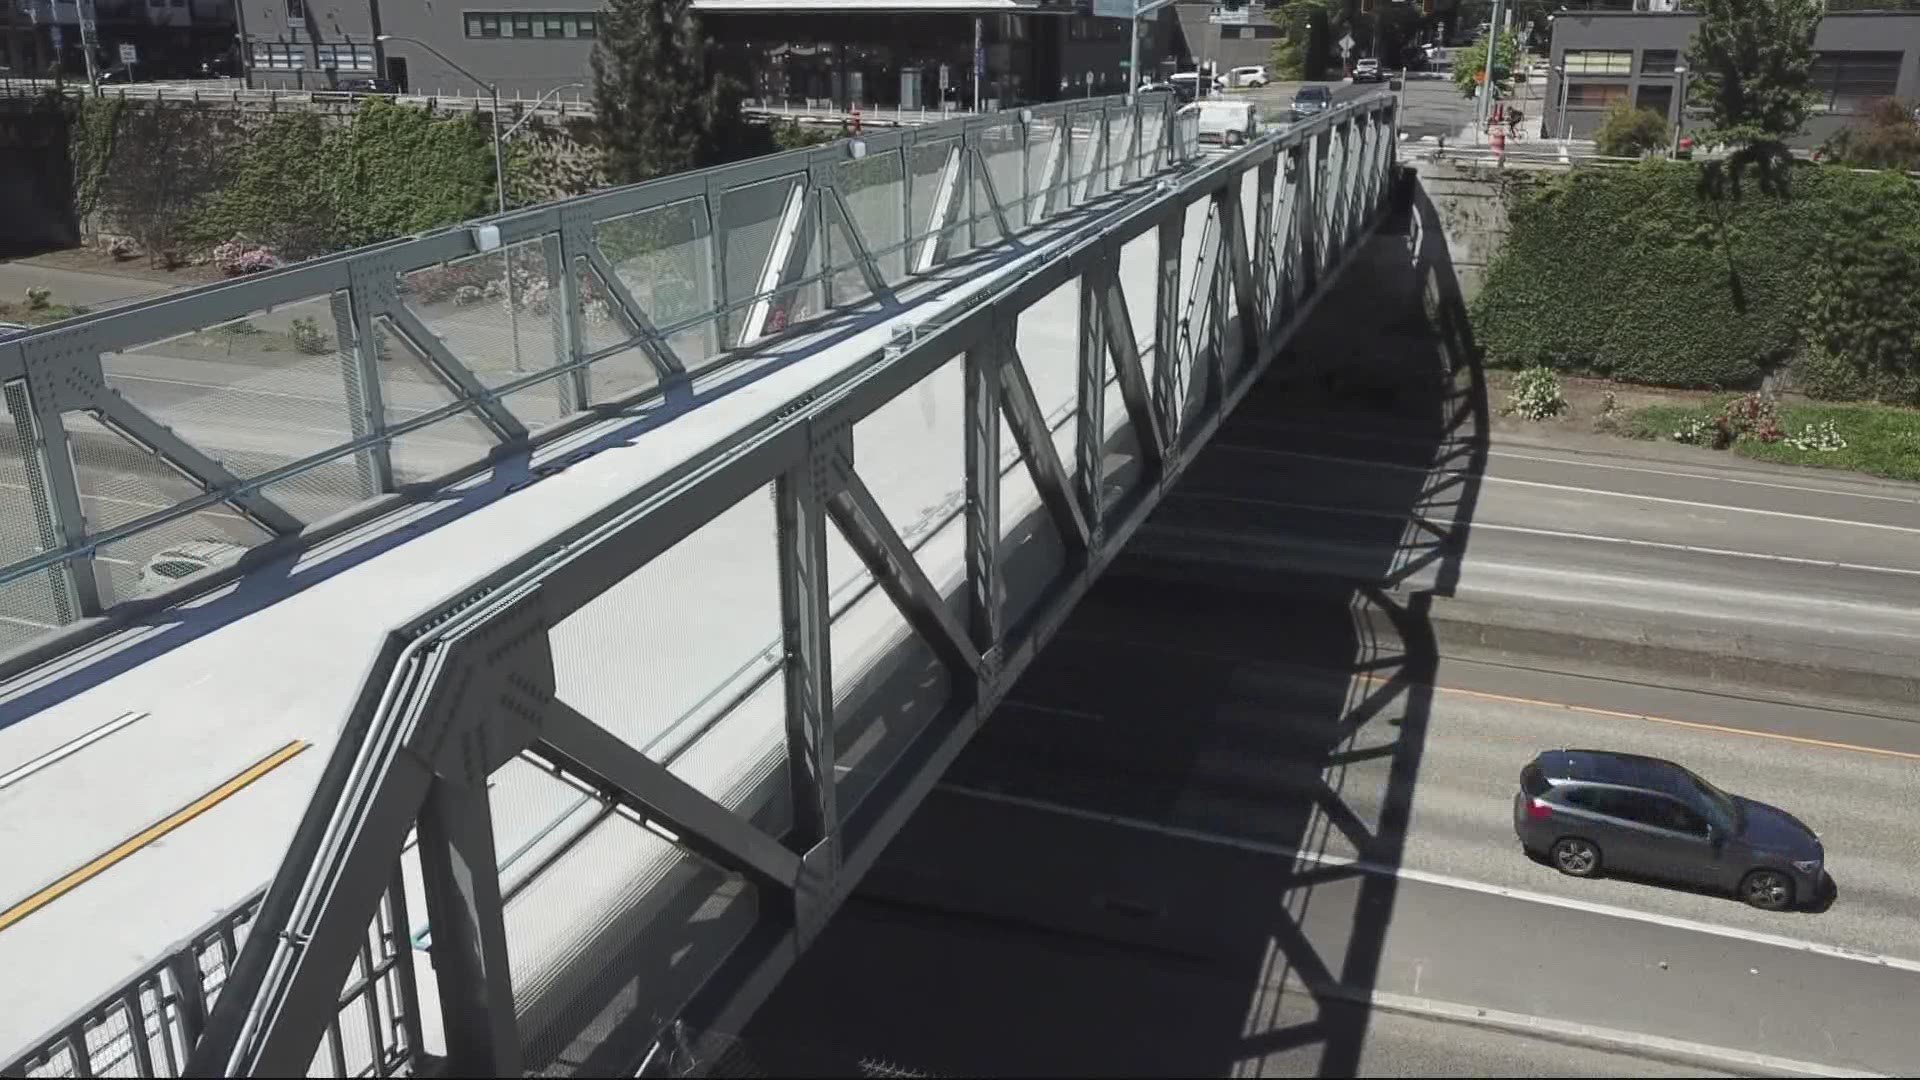 By foot or bicycle, the trip across I-405 from Northwest to the Pearl District is about to get a lot easier. Chris McGinness shows us Flanders Crossing.